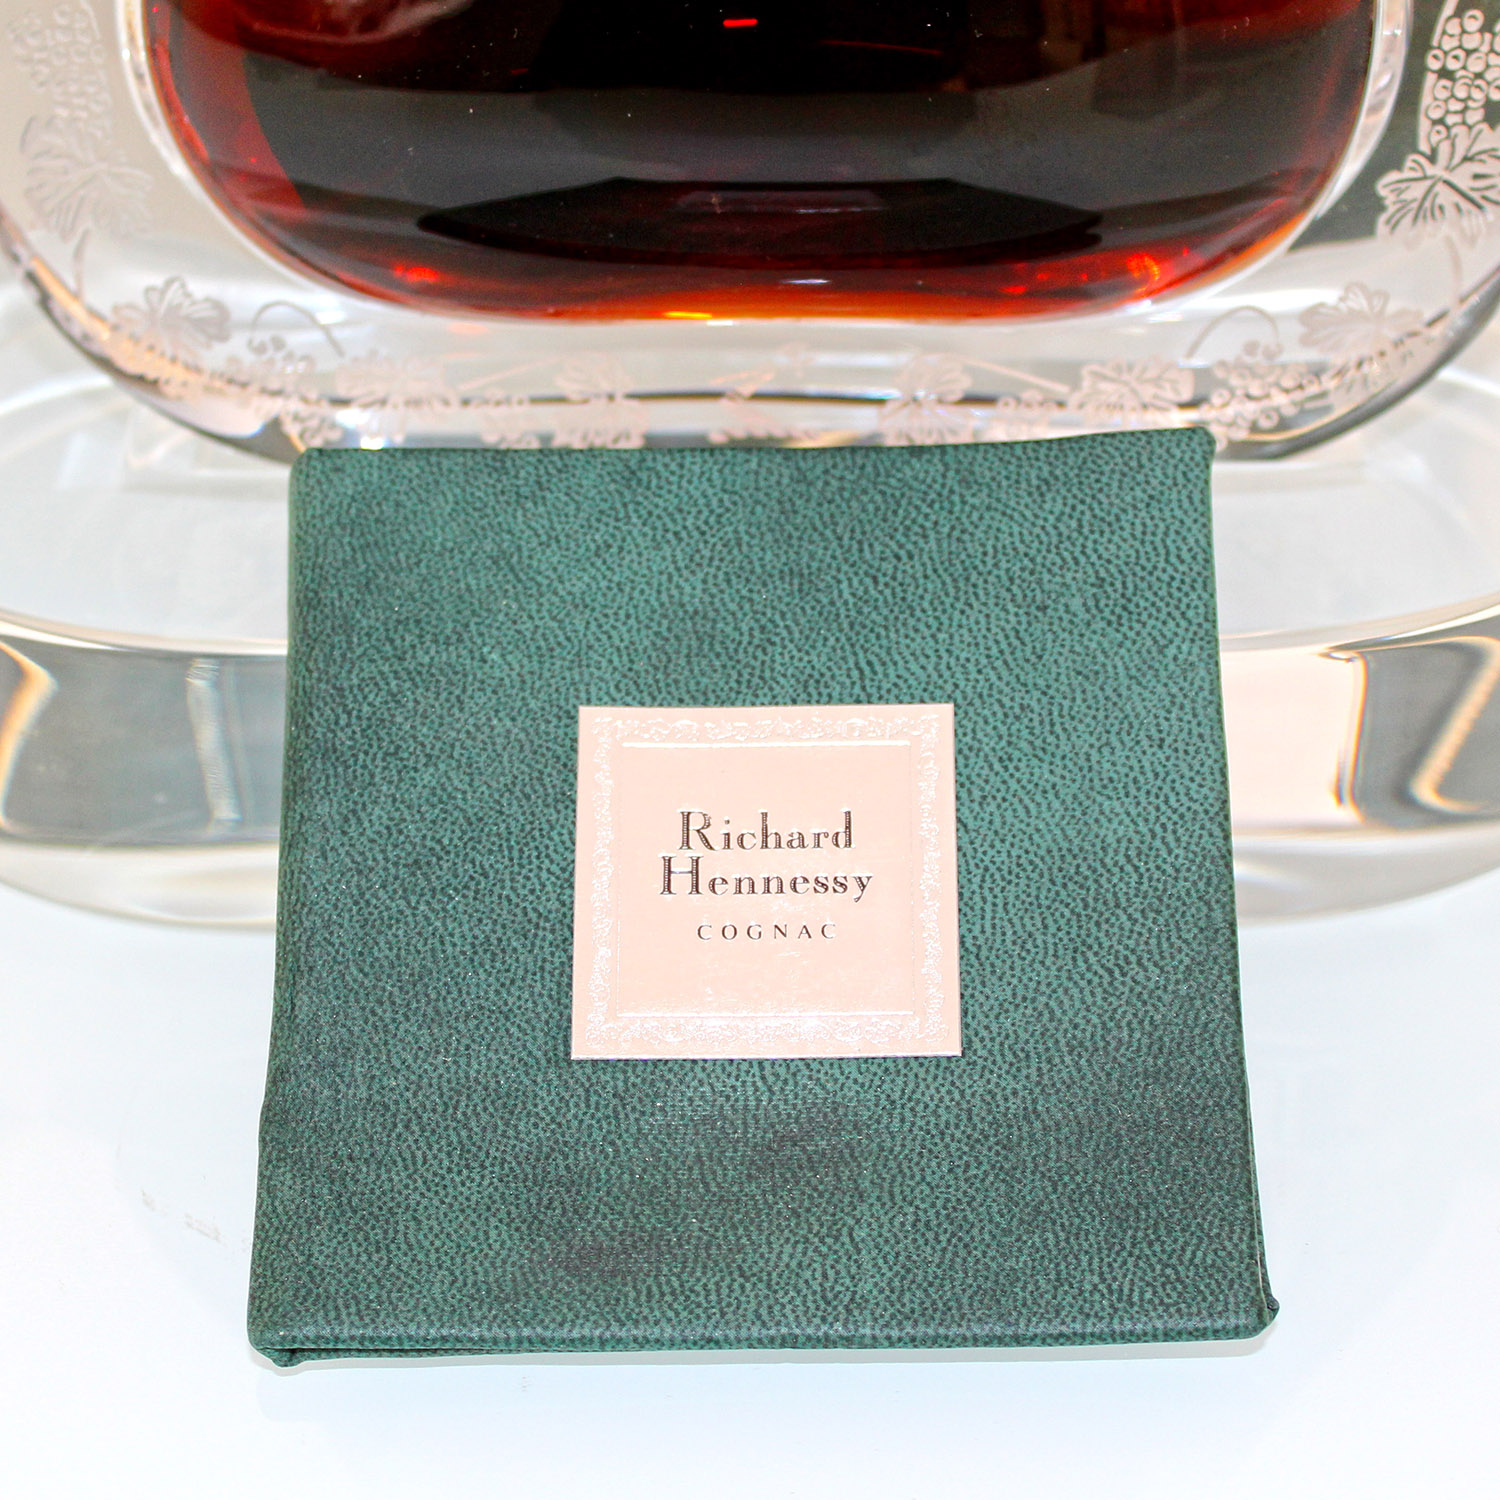 Richard Hennessy Cognac 1990s incl Display booklet